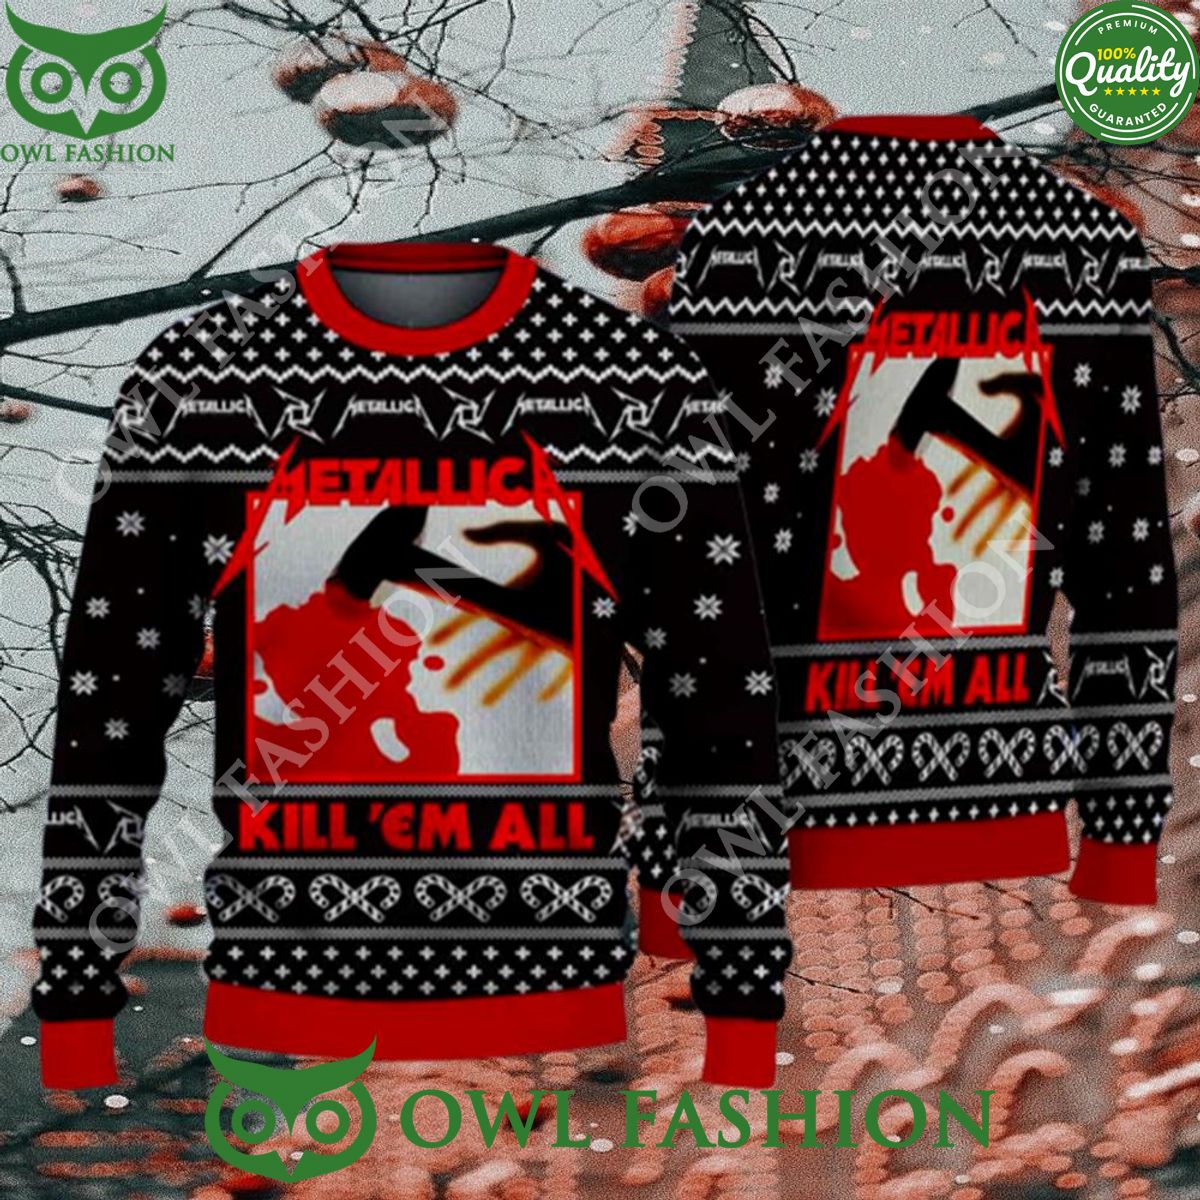 metallica kill em album all snowflakes and candy cane christmas sweater jumper 1 V5nZA.jpg